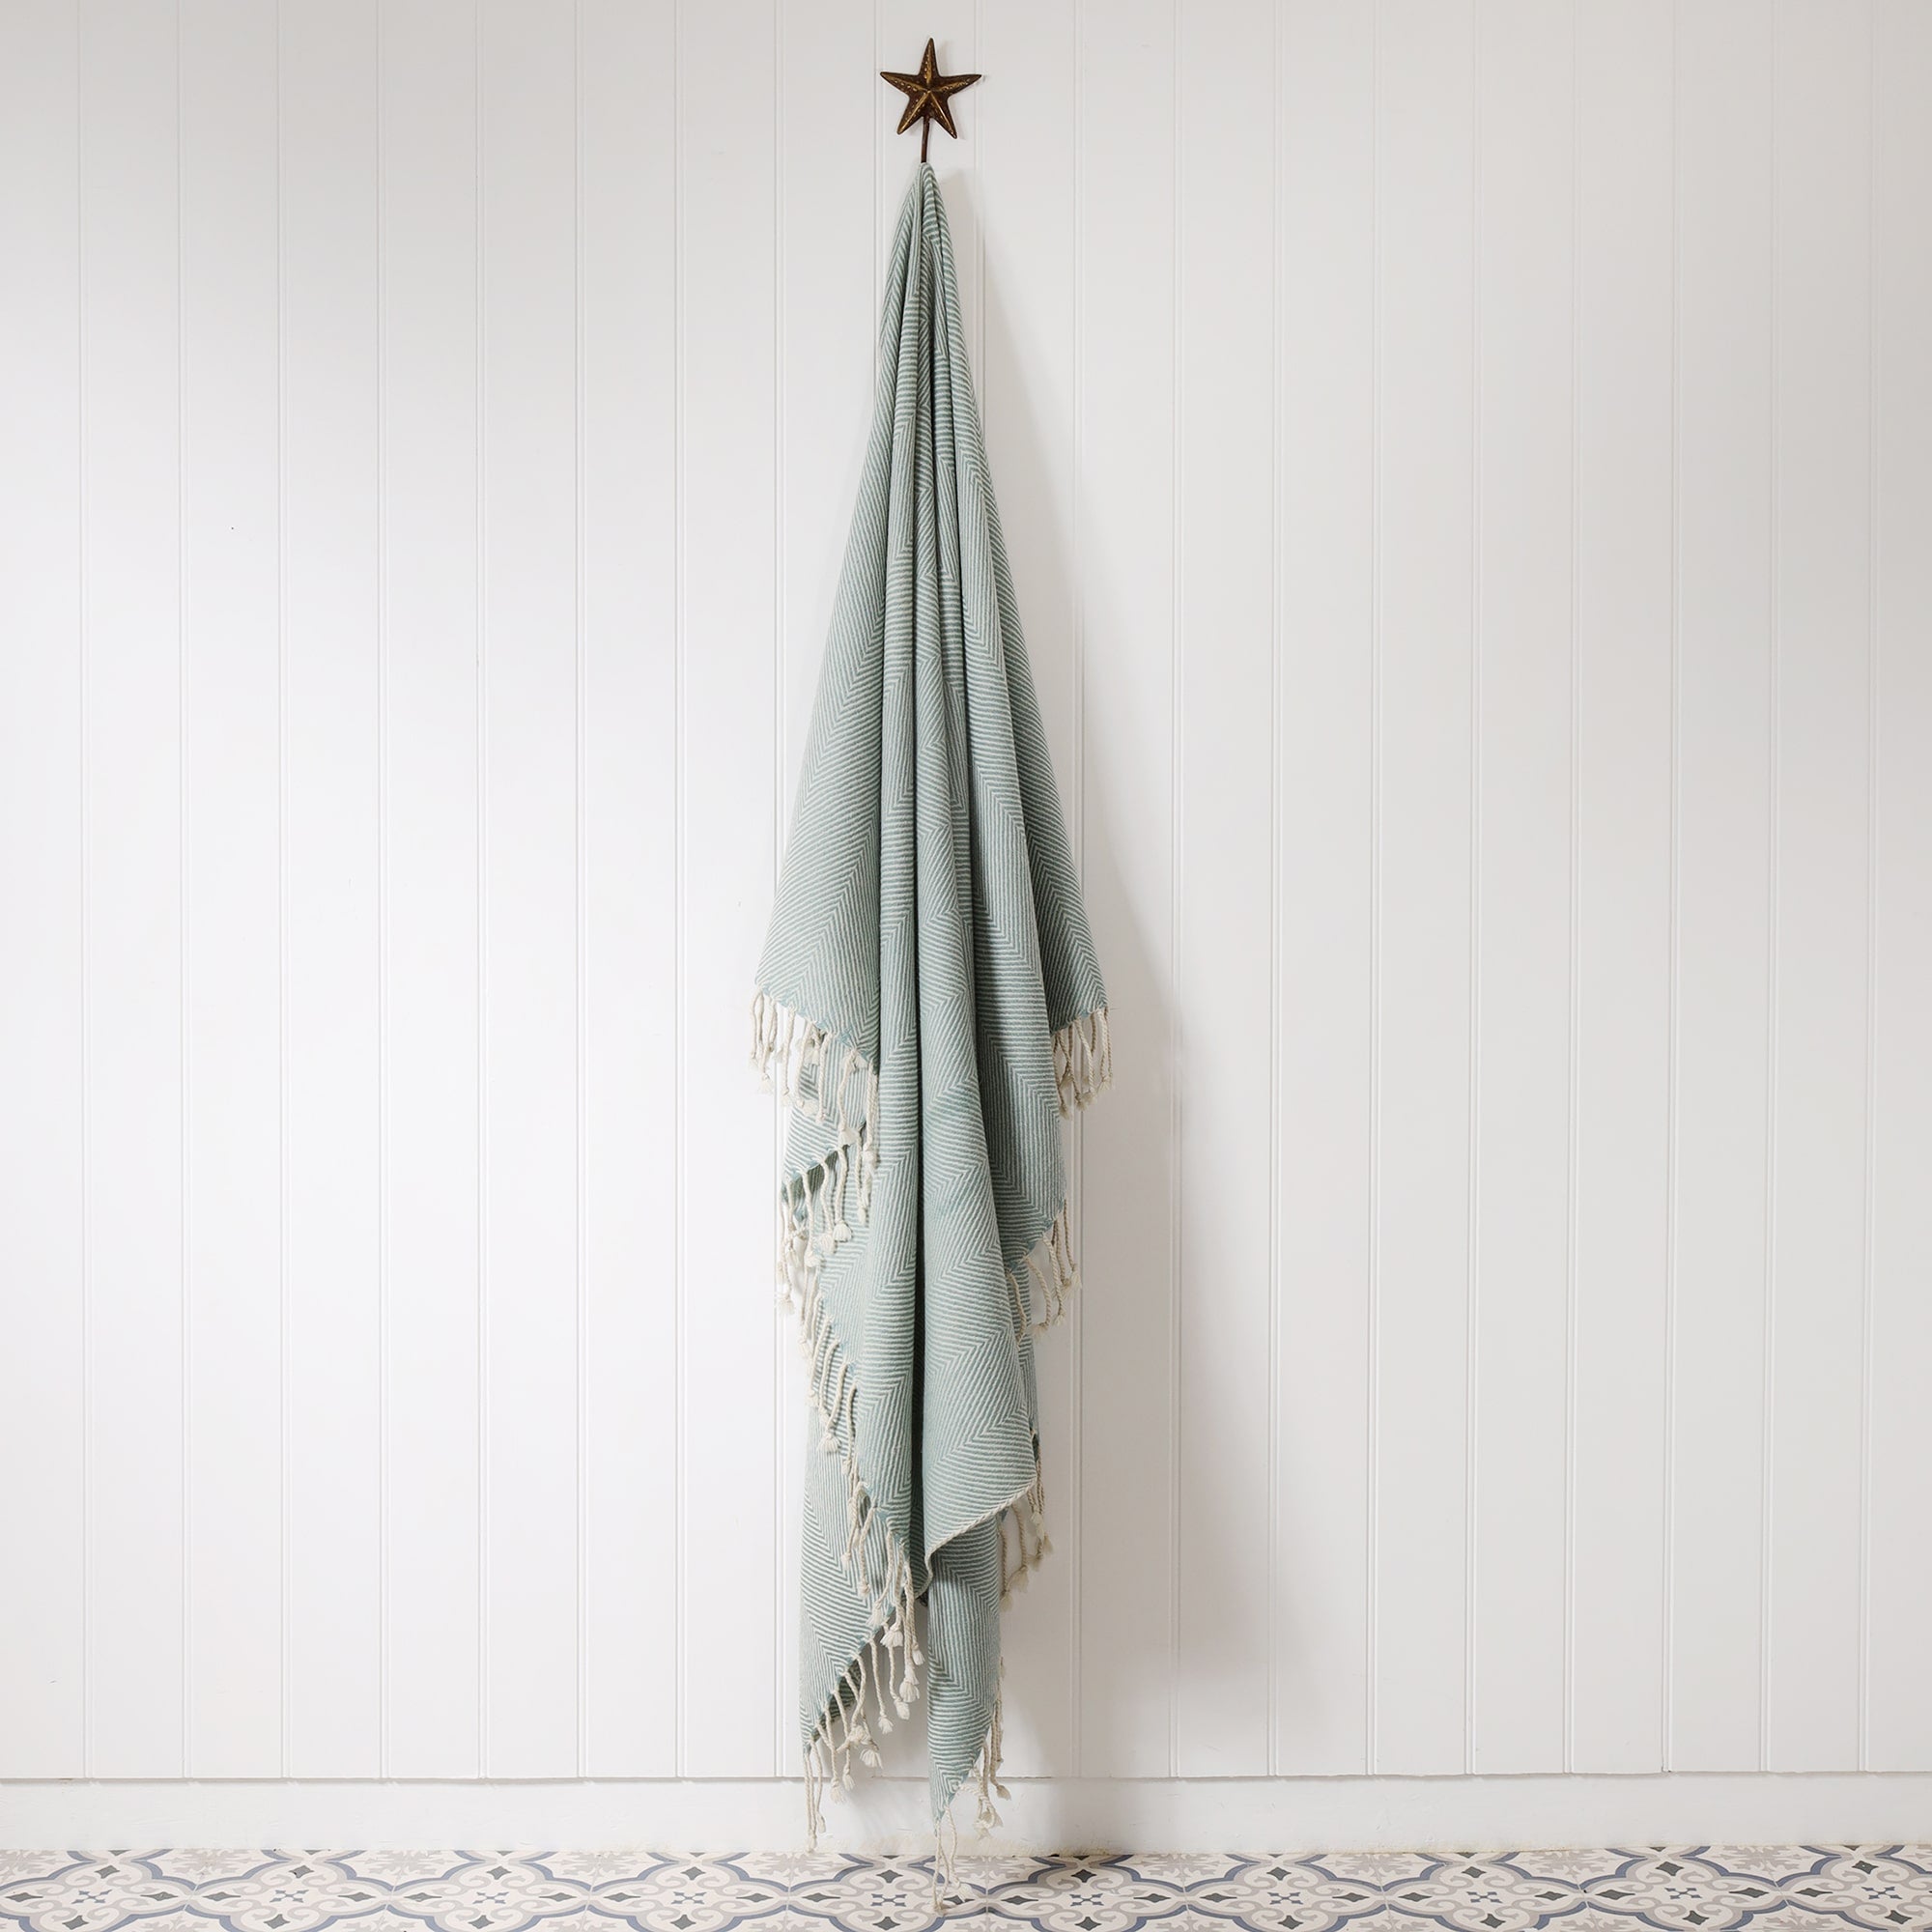 duck egg and cream woven throw with knotted fringe hanging on a brass starfish hook against a white tongue & groove wall